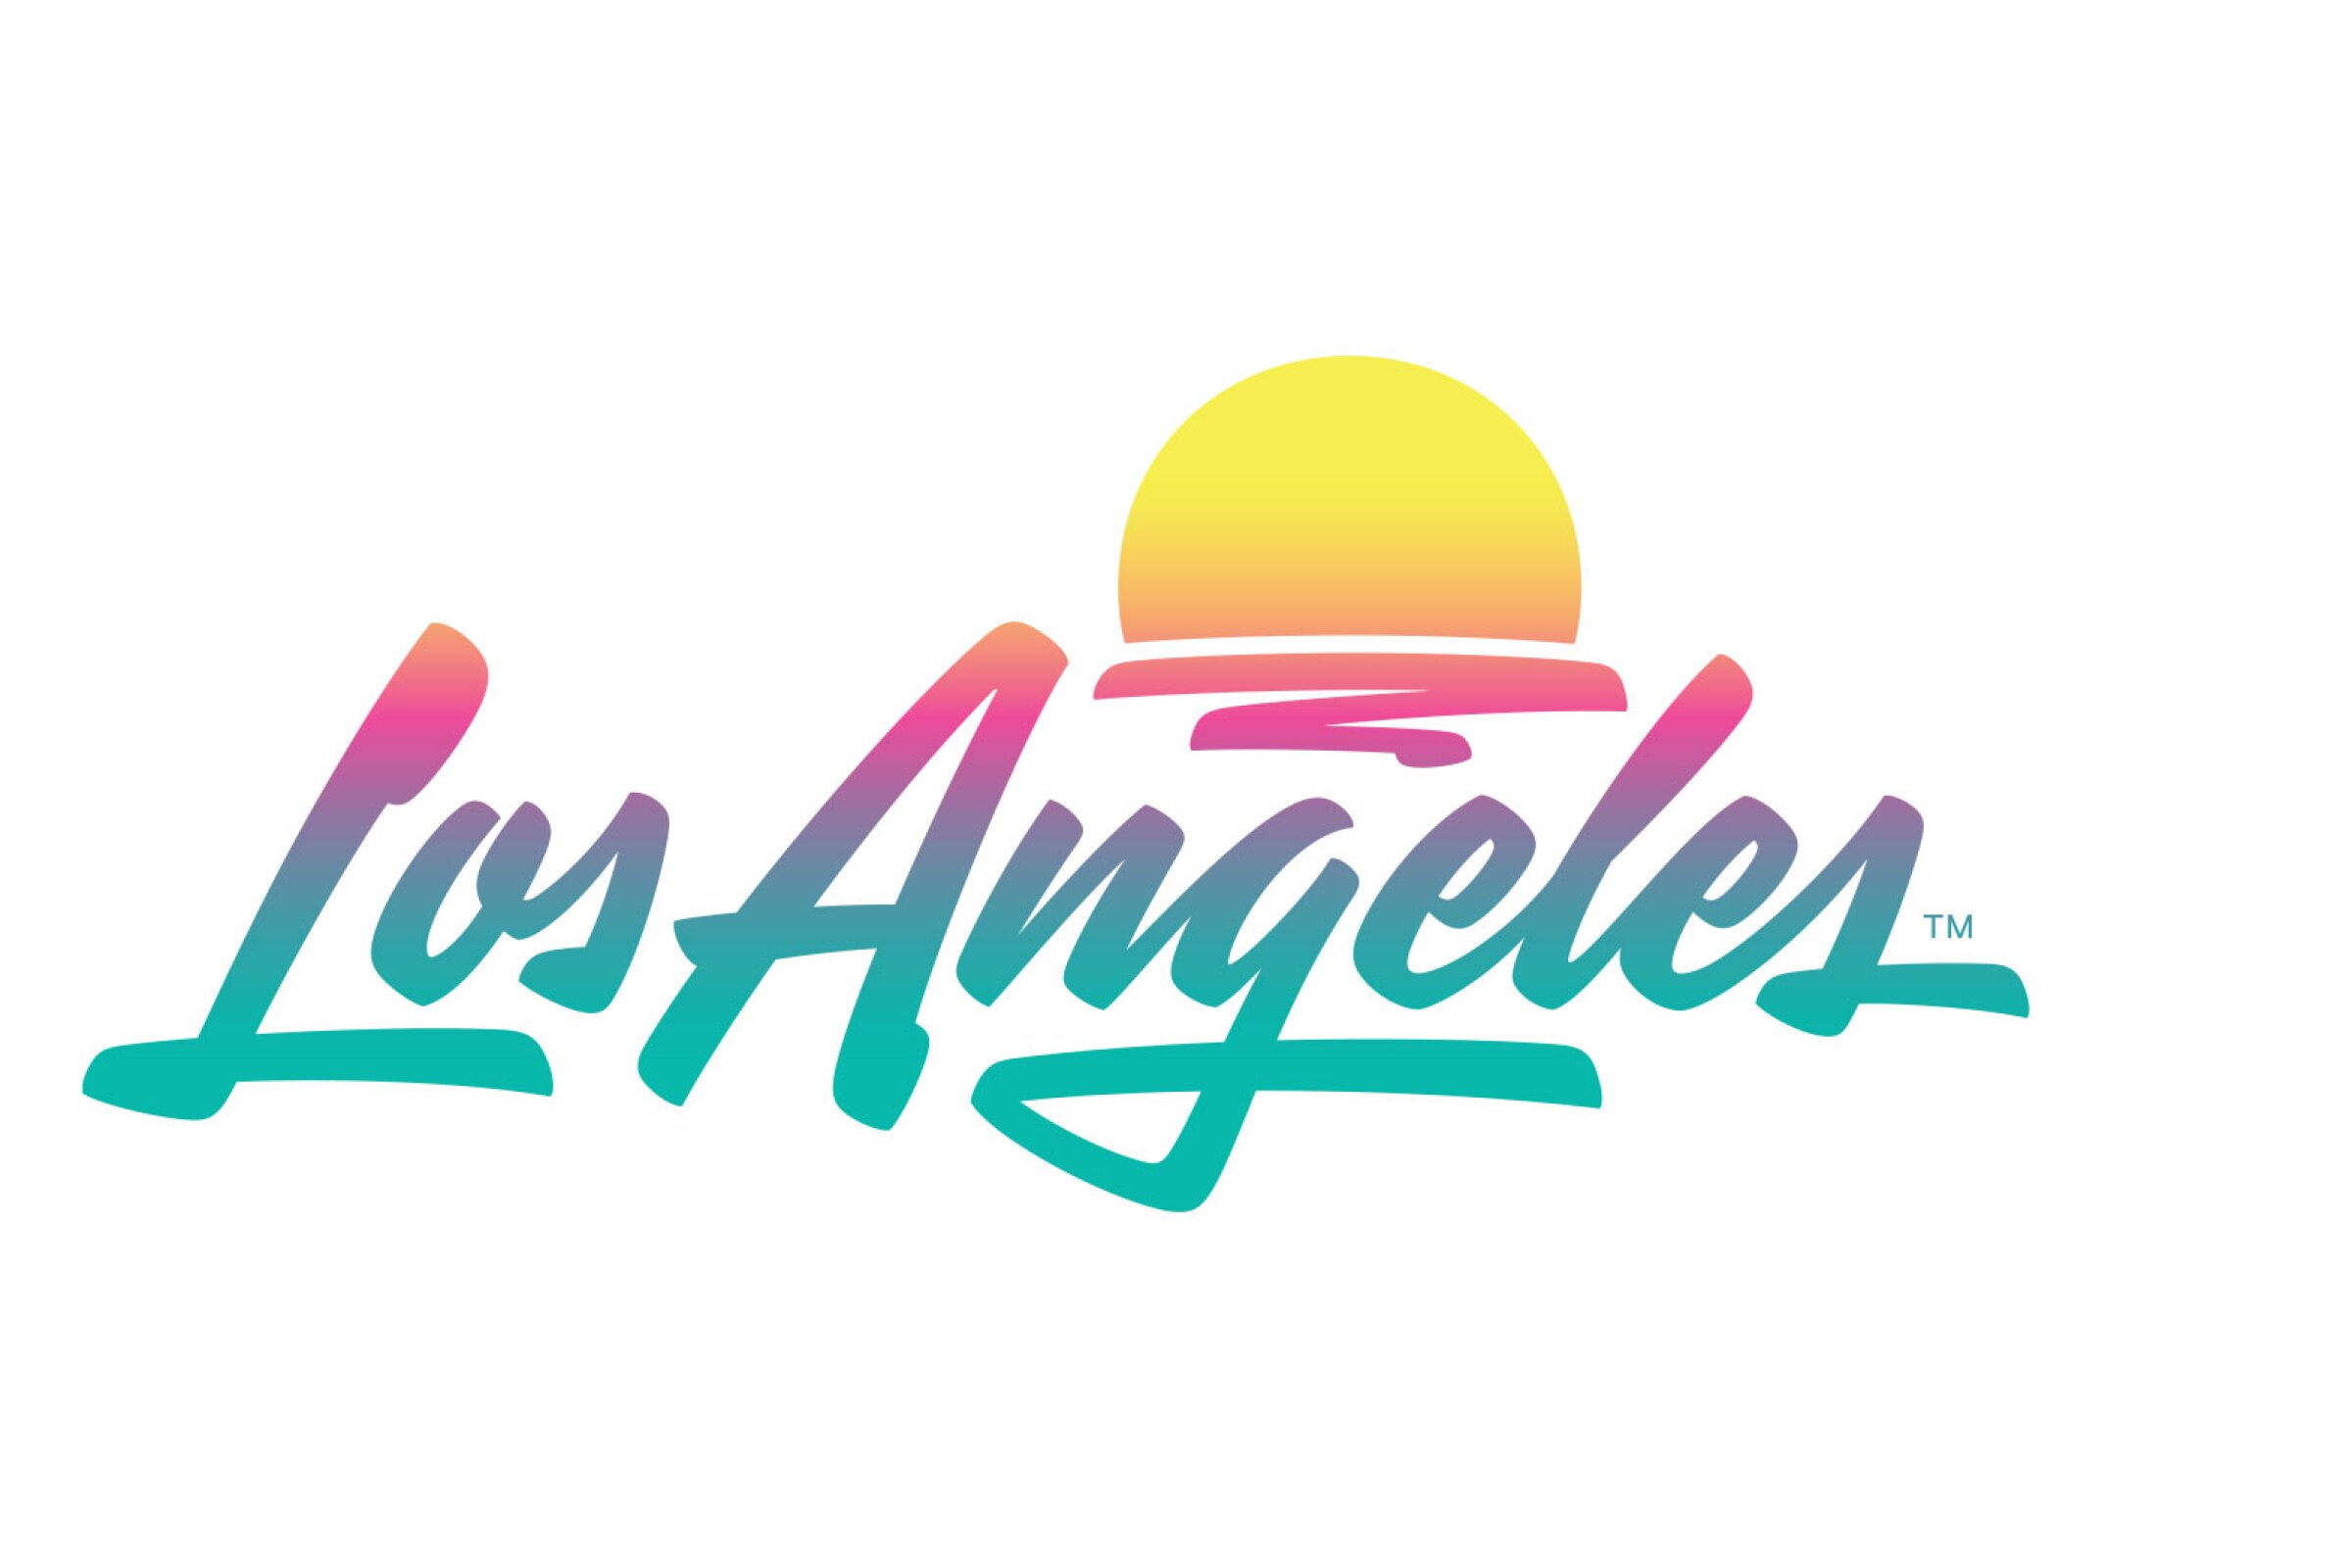 A logo in turquoise, pink and yellow shows a setting sun over a script that reads "Los Angeles"